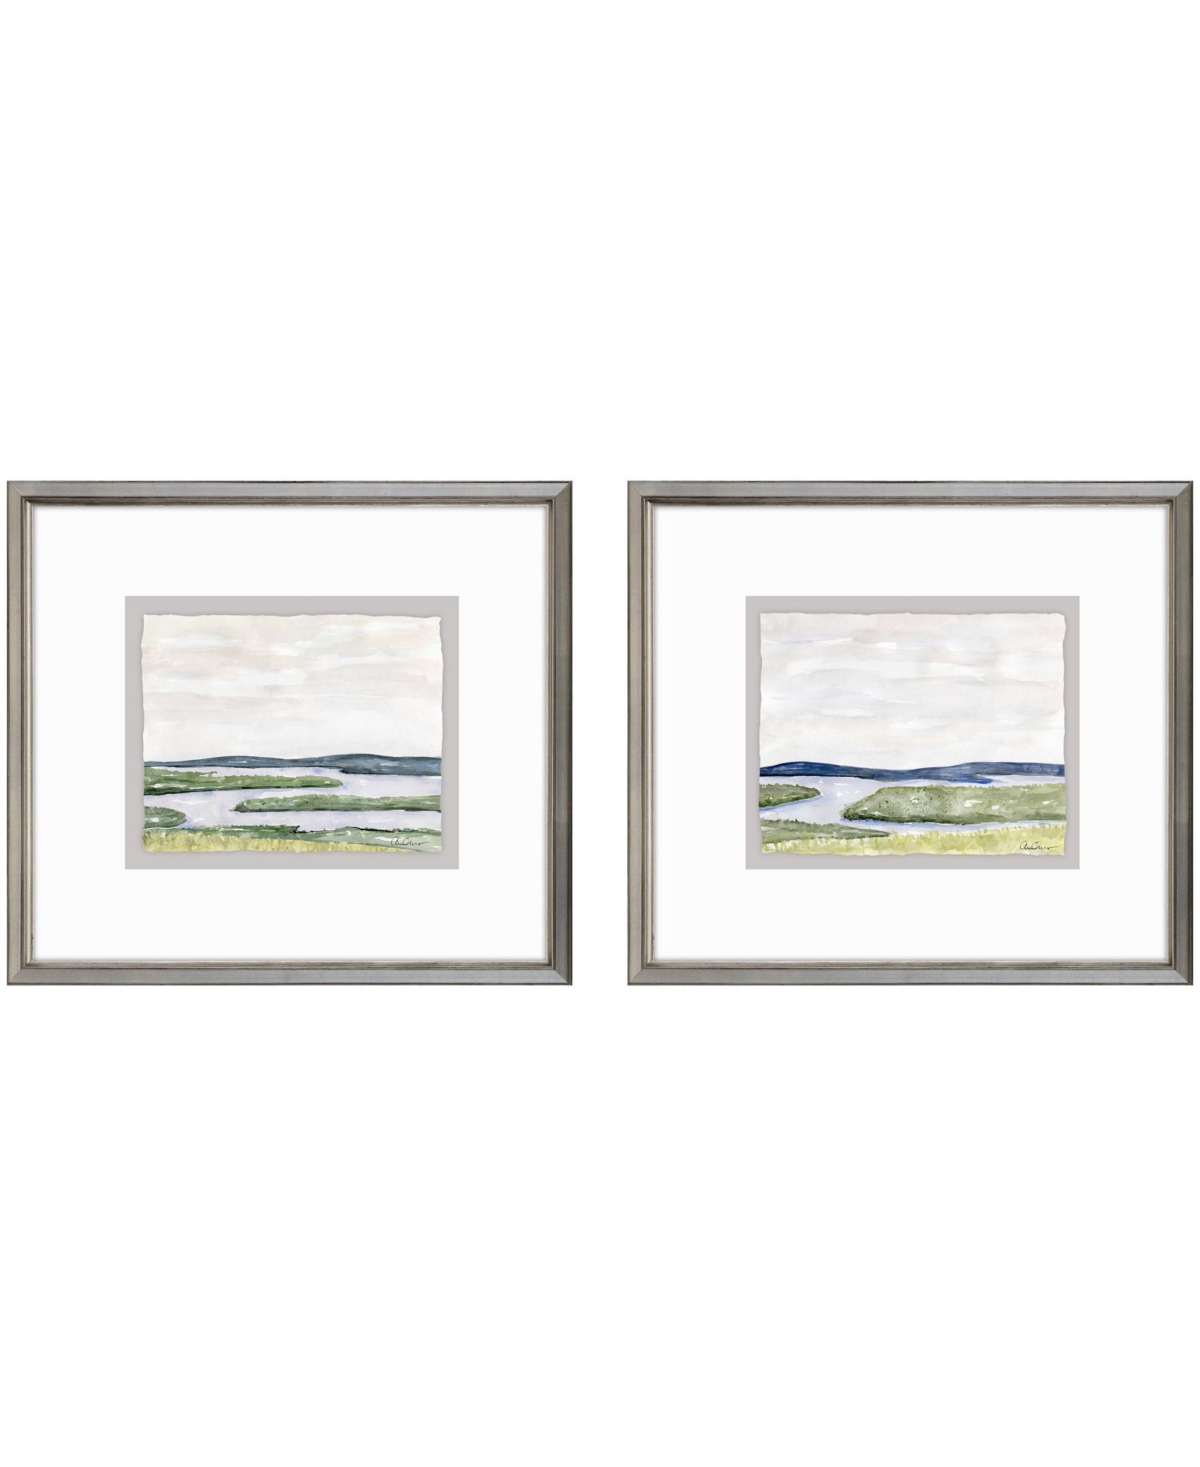 Paragon Picture Gallery Waterside Marsh Framed Art, Set Of 2 In Blue